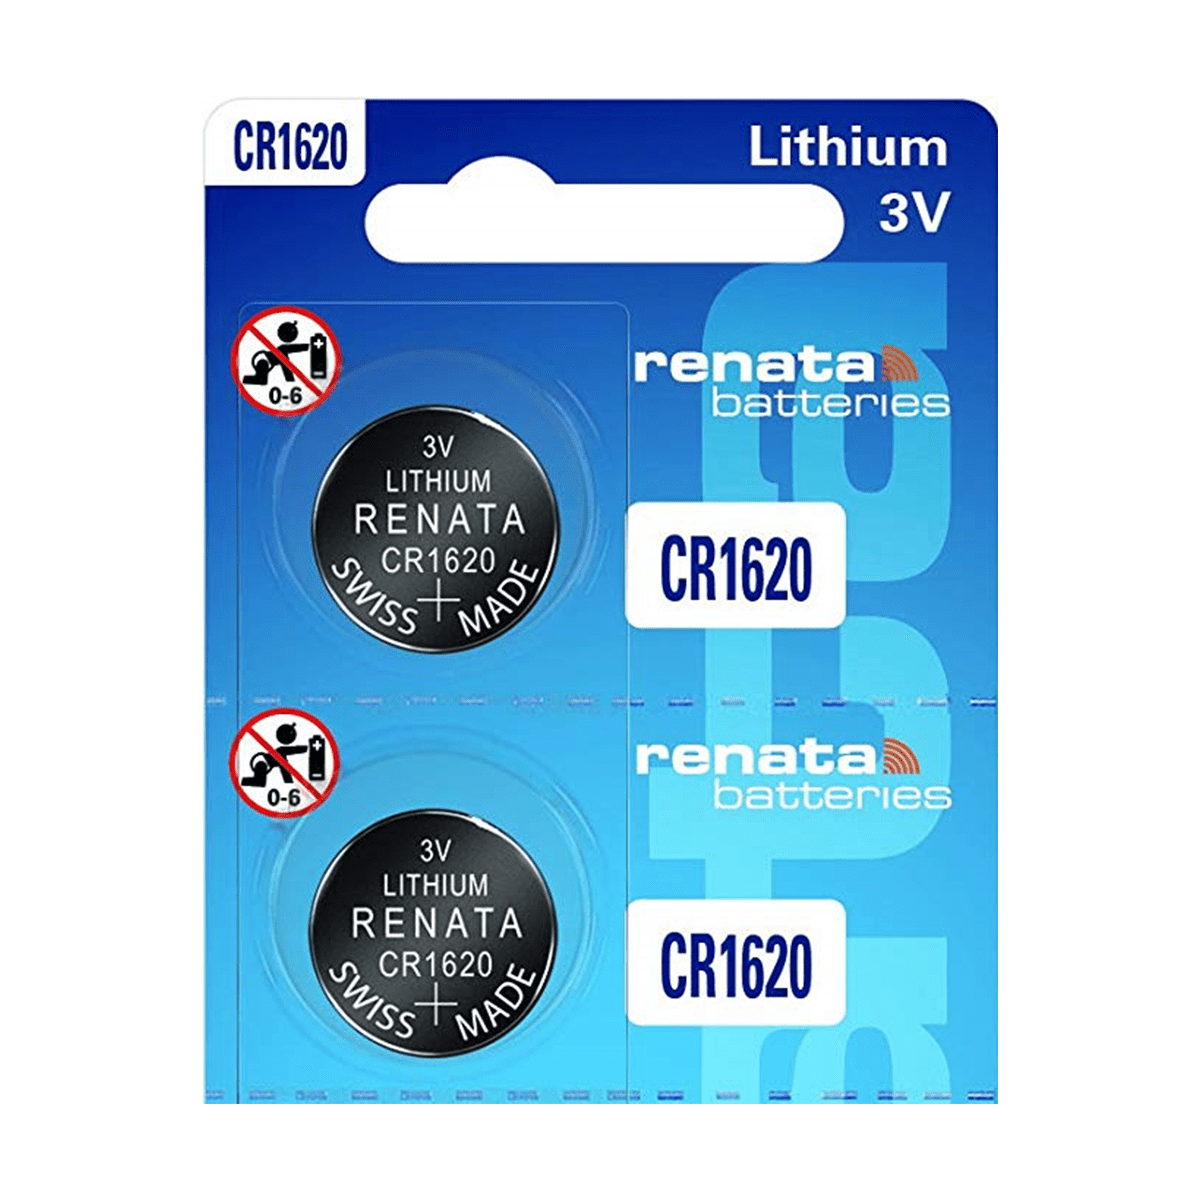 Renata CR1620 Batteries - 3V Lithium Coin Cell 1620 Battery (2 Count)